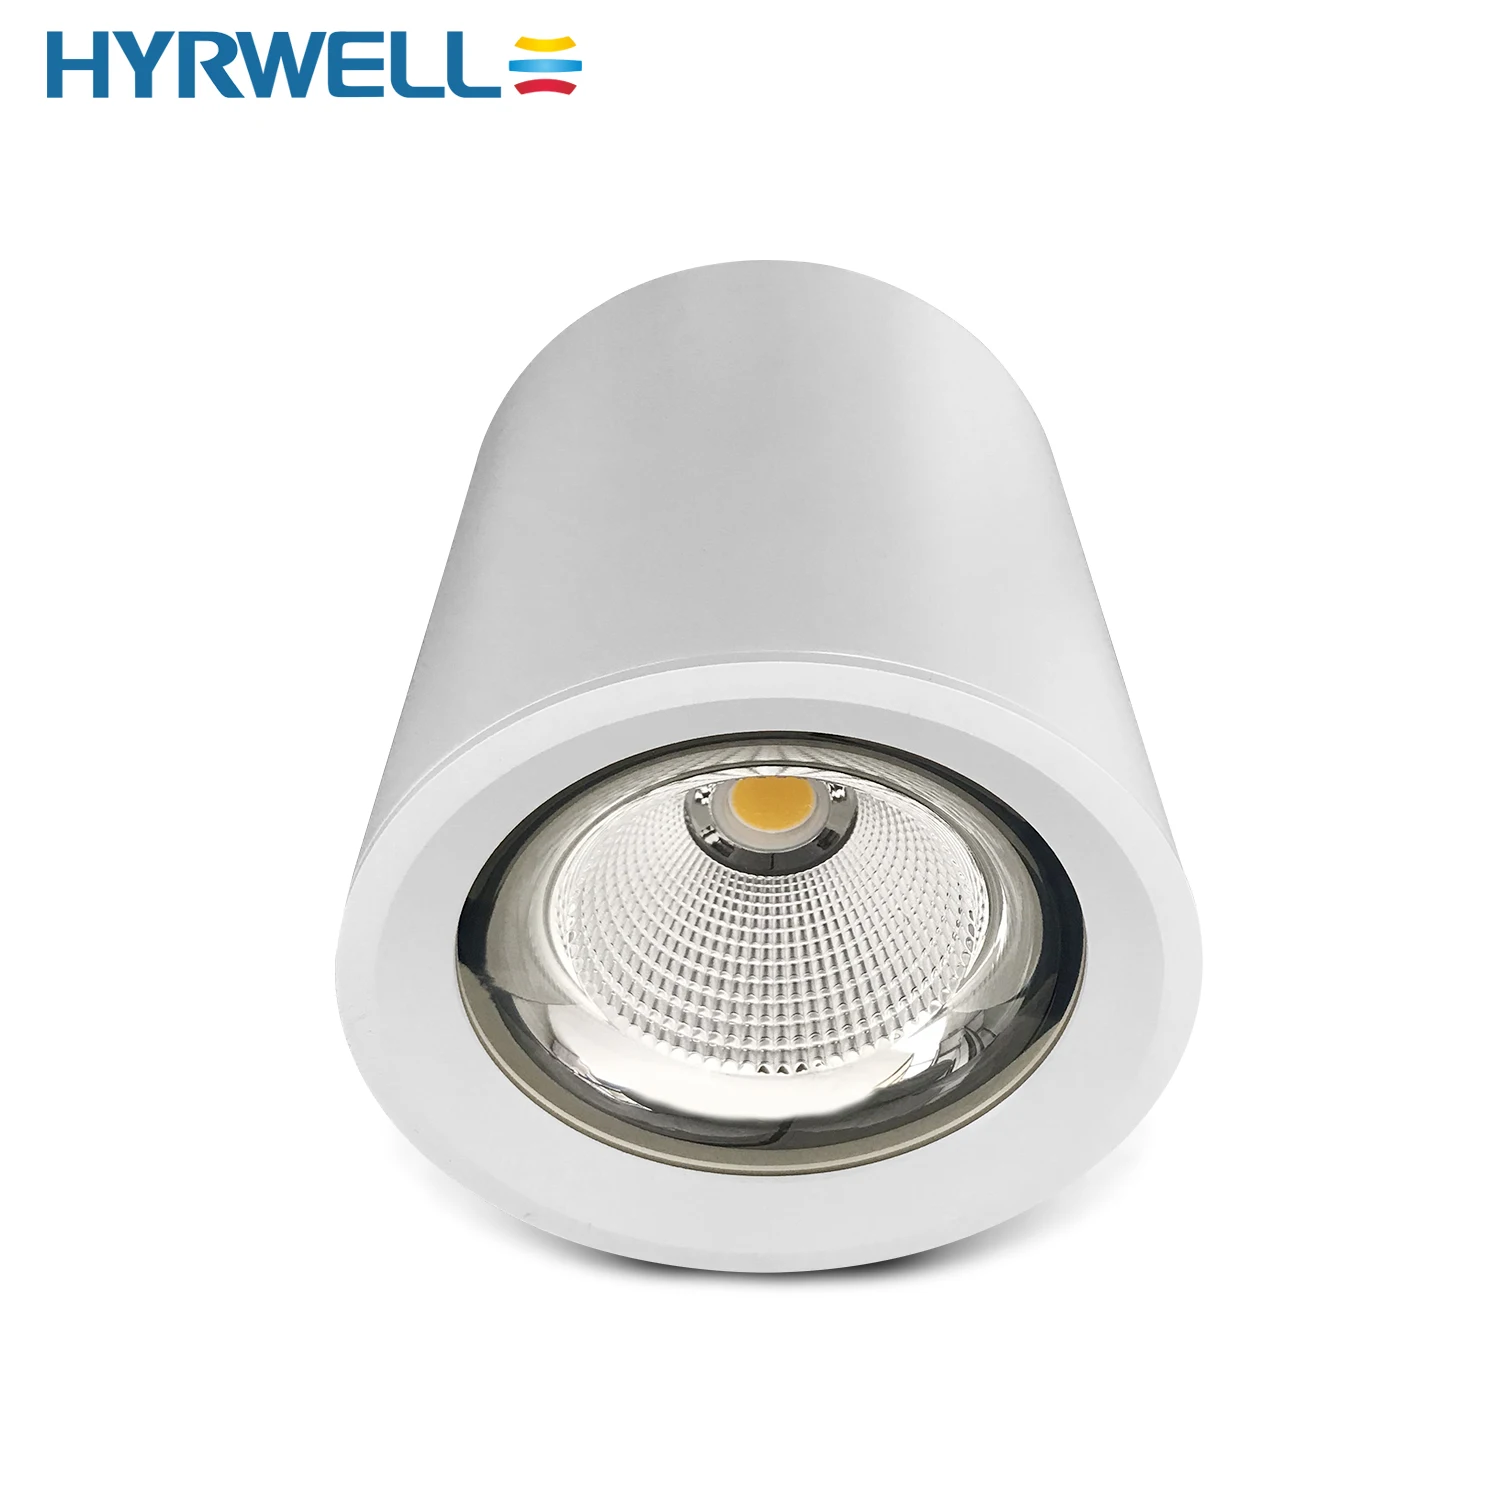 HYRWELL Dimmable Led Surface Mounted Downlights Triac 10V Dali Dimming Solutions